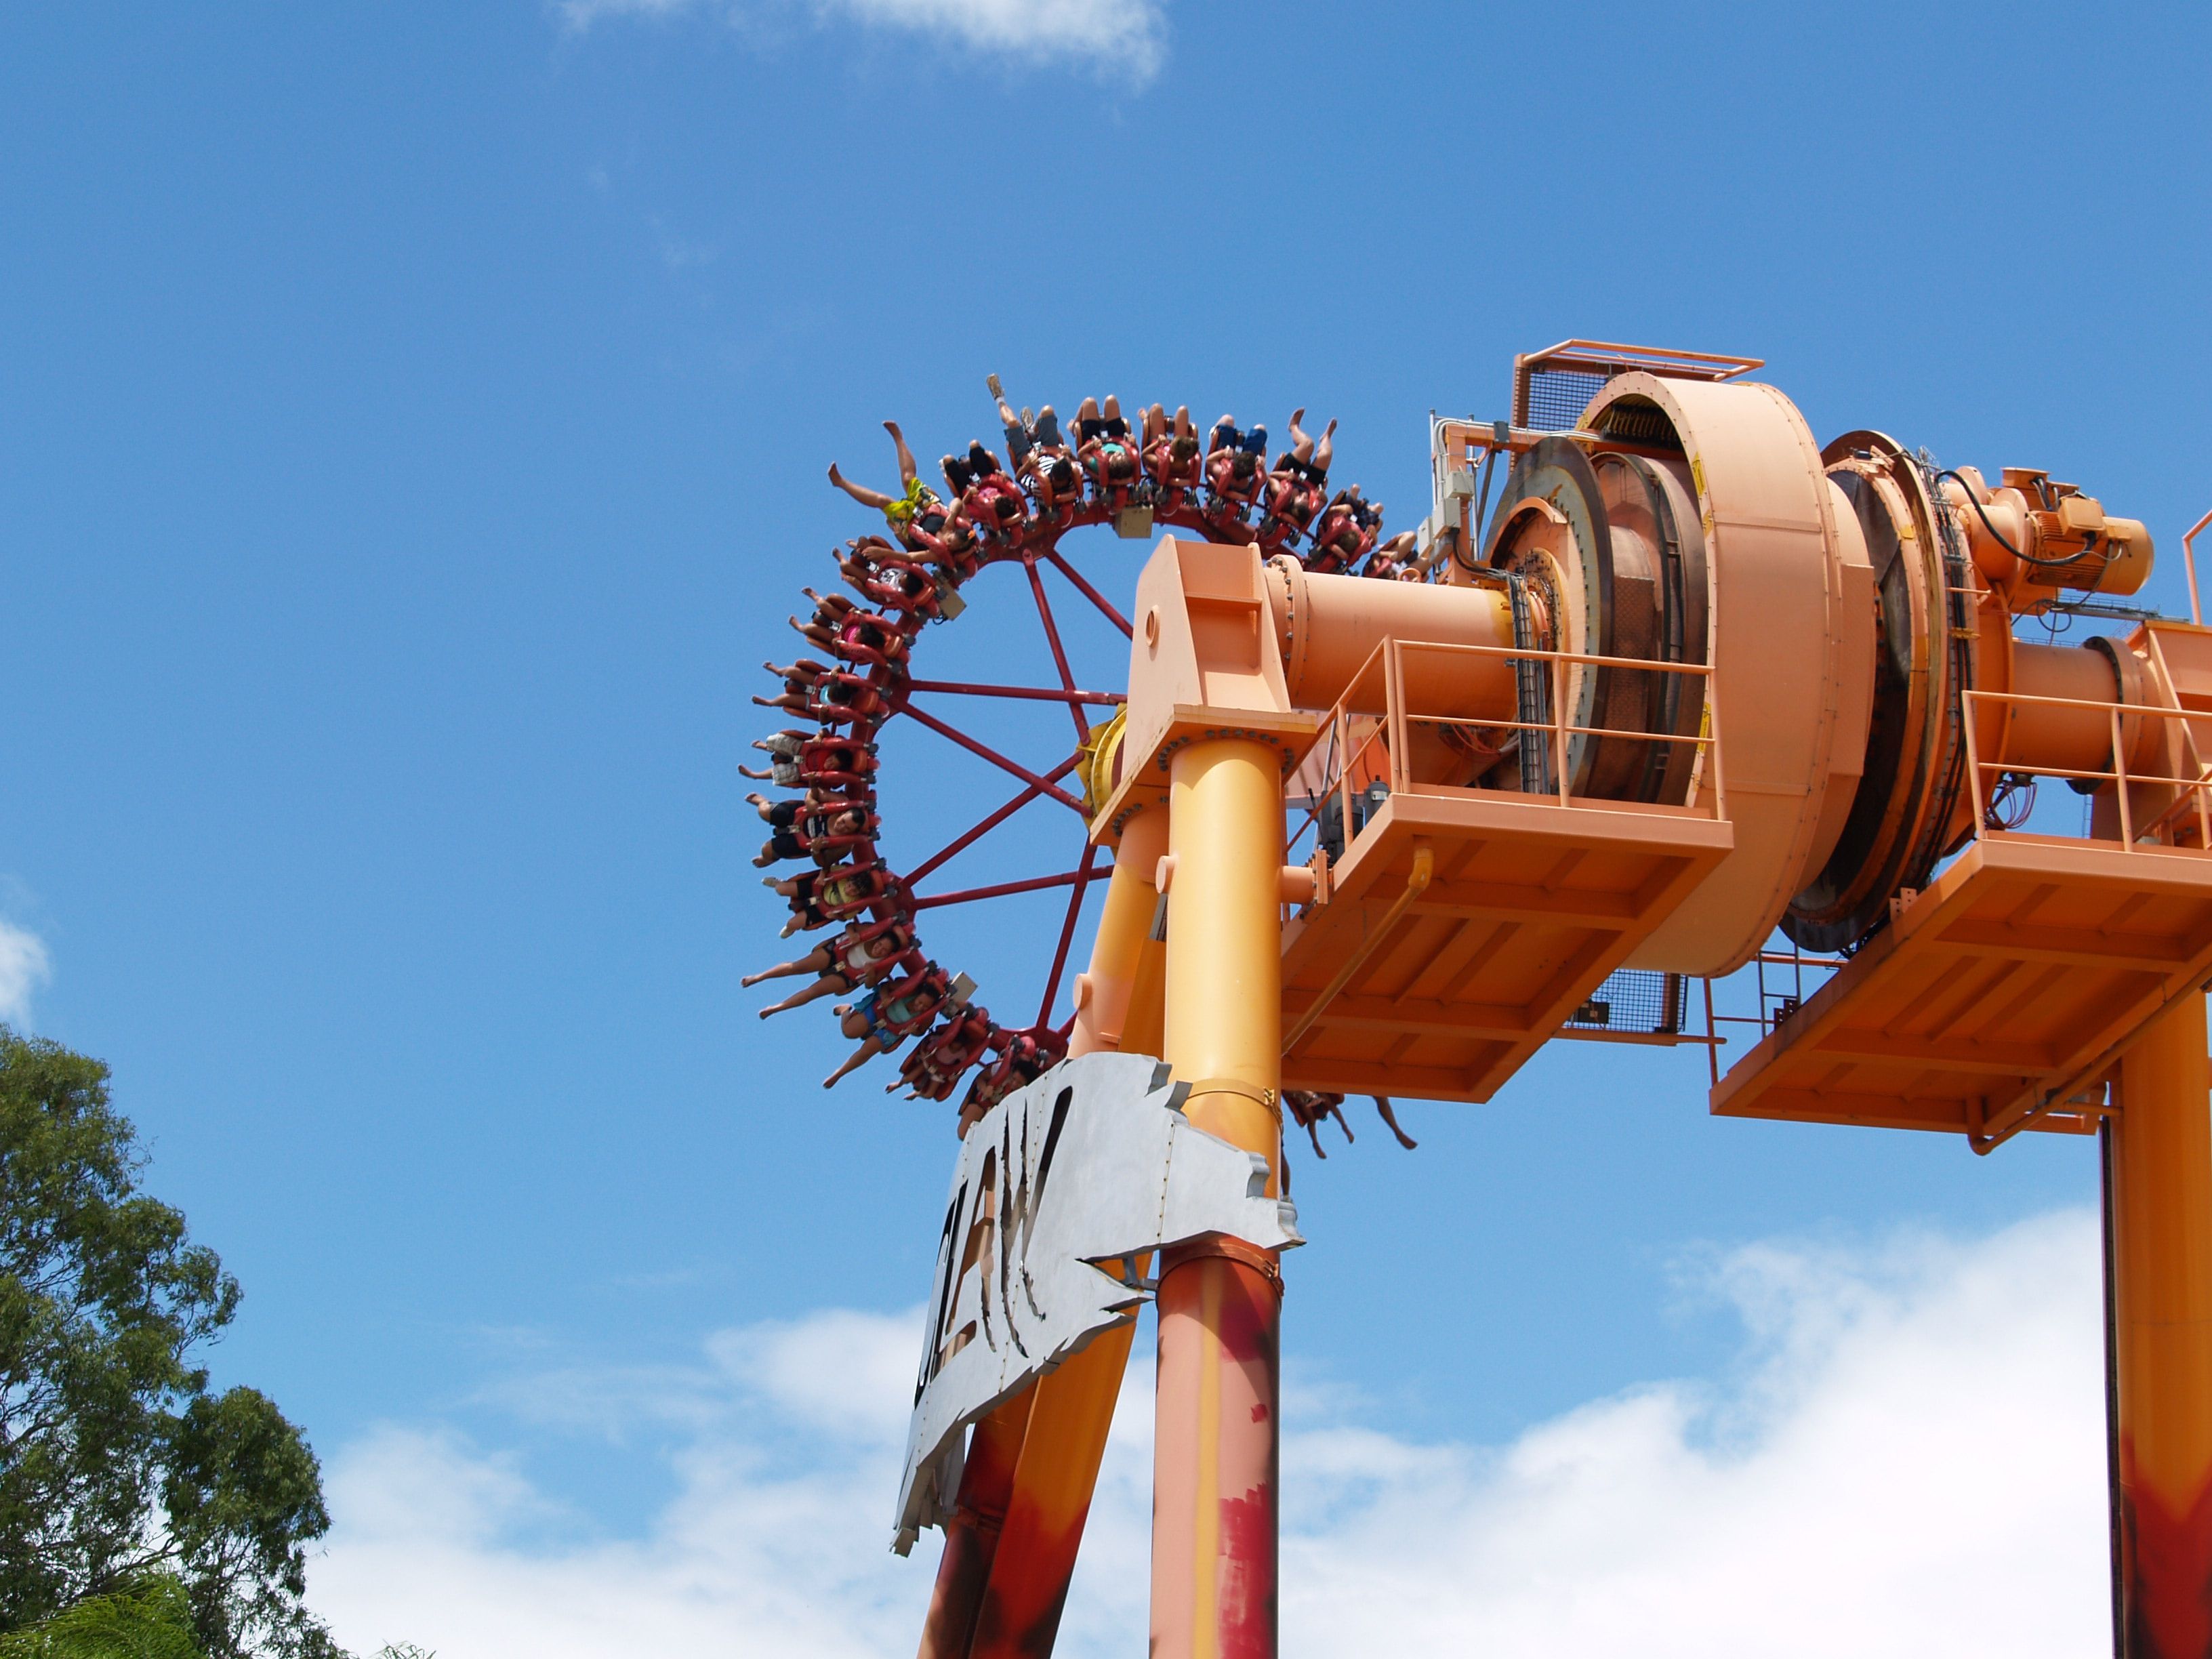 The Claw at Dreamworld on the Gold Coast